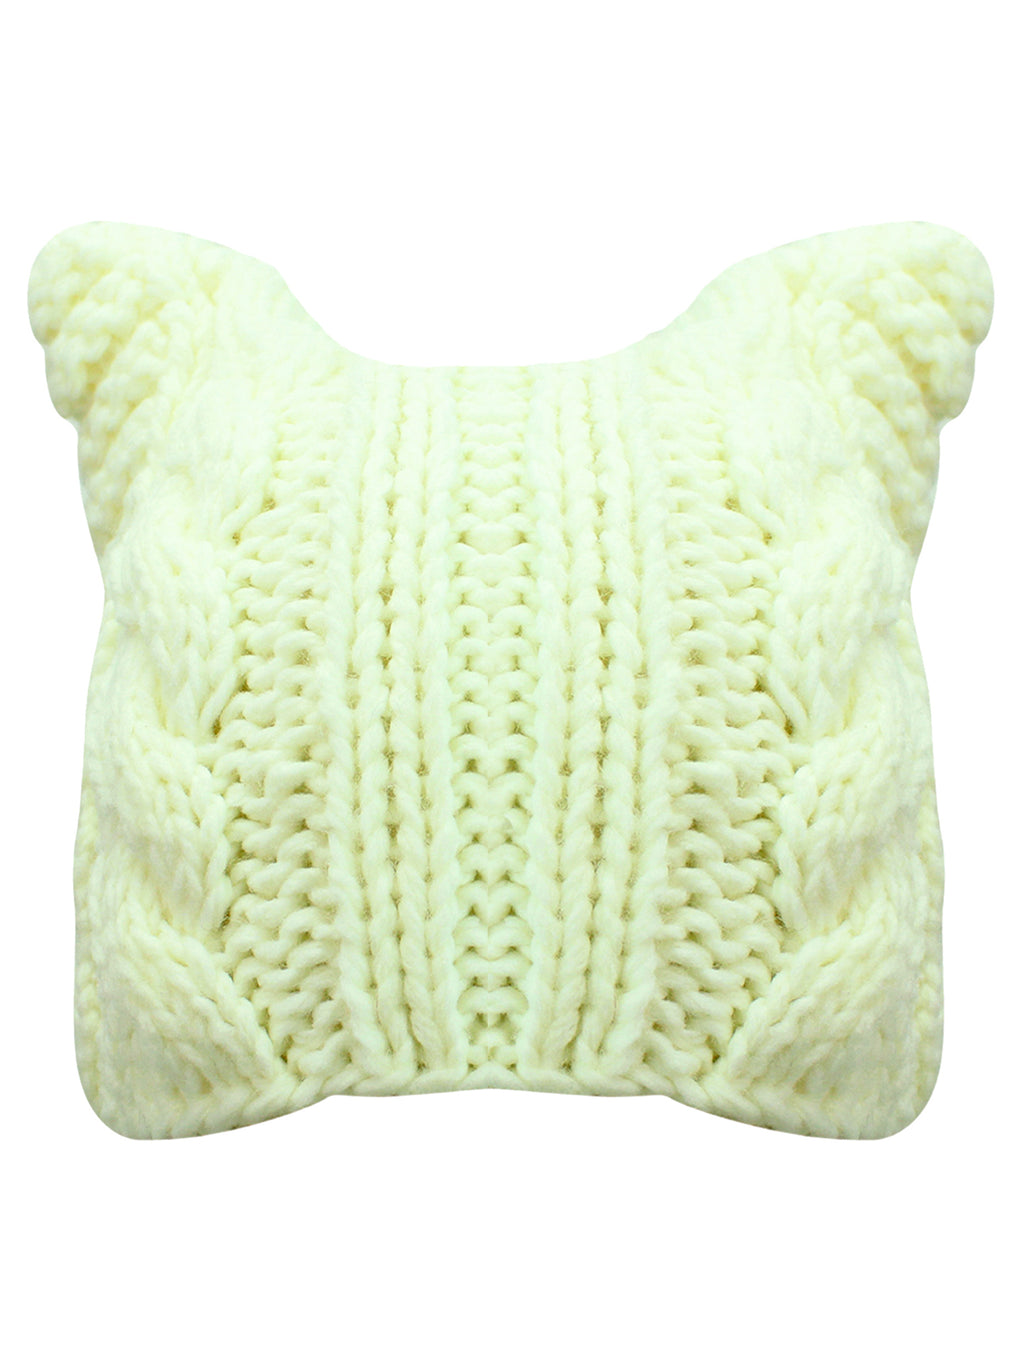 White Cable Knit Beanie Hat With Pussy Cat Ears